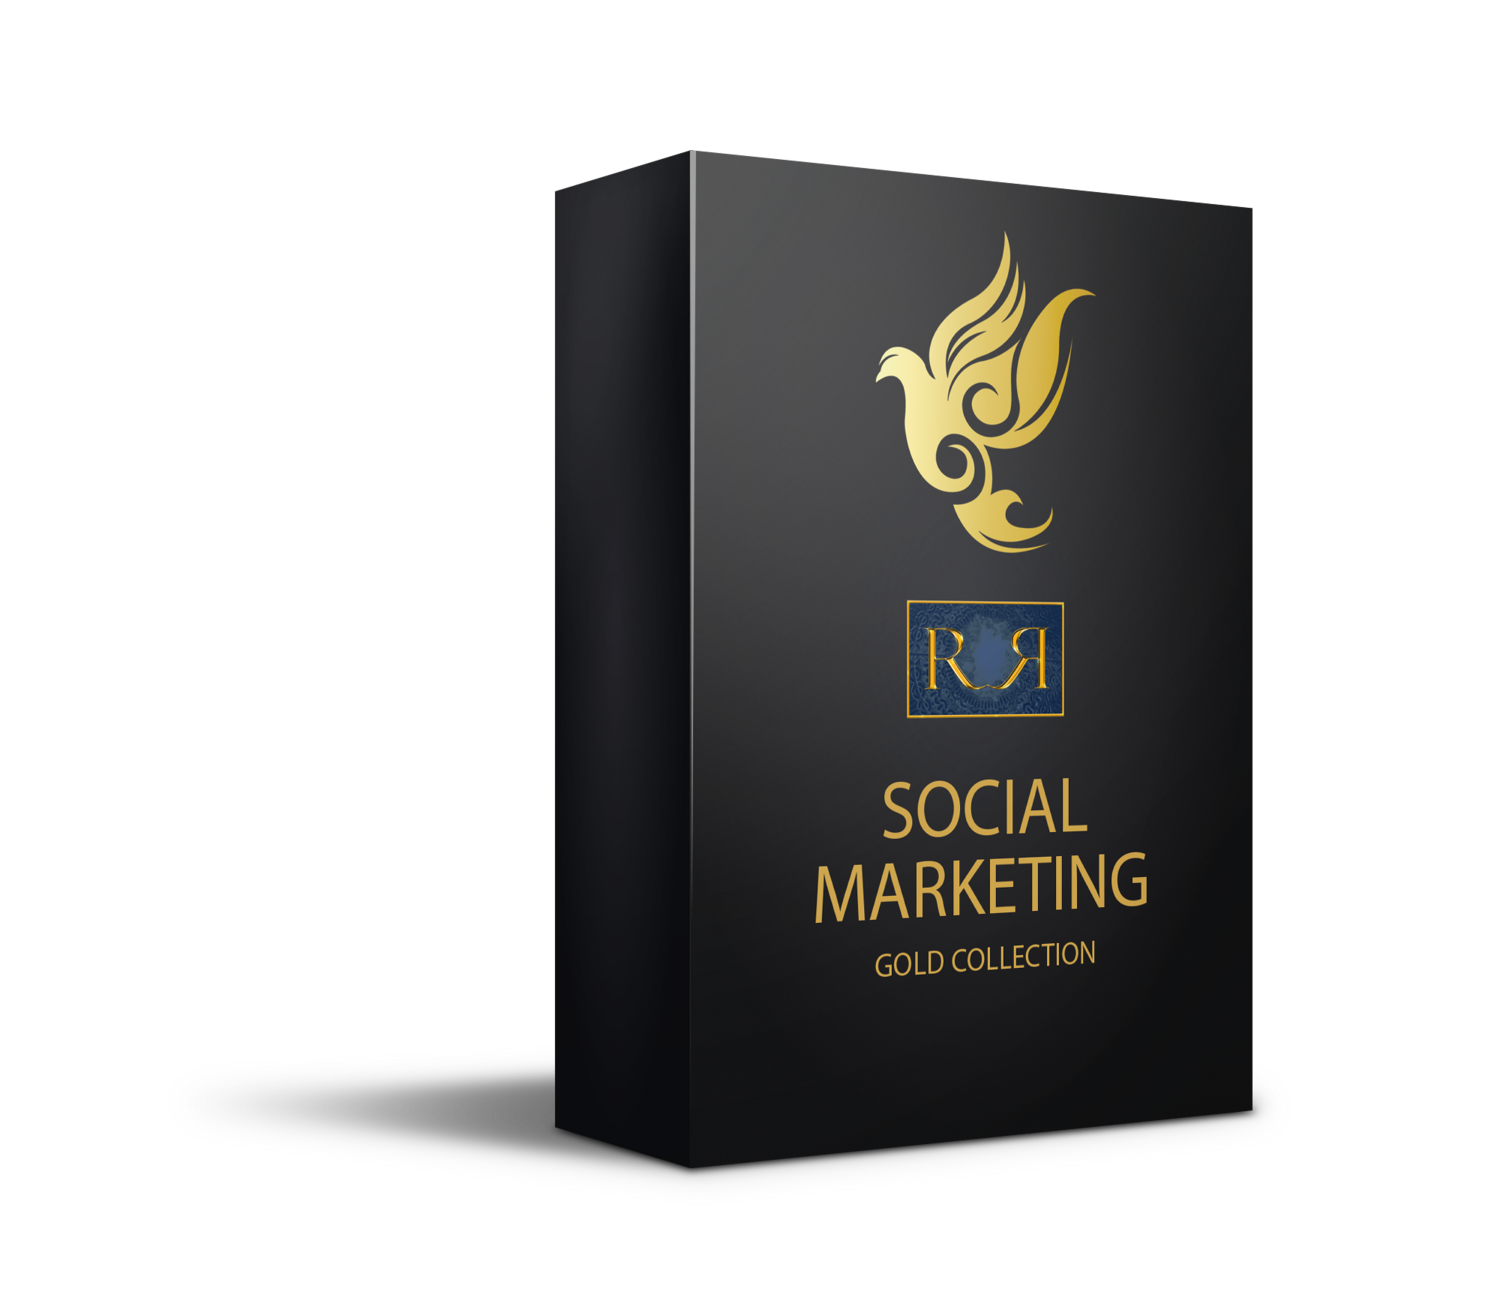 Social Marketing - Refined Reflections